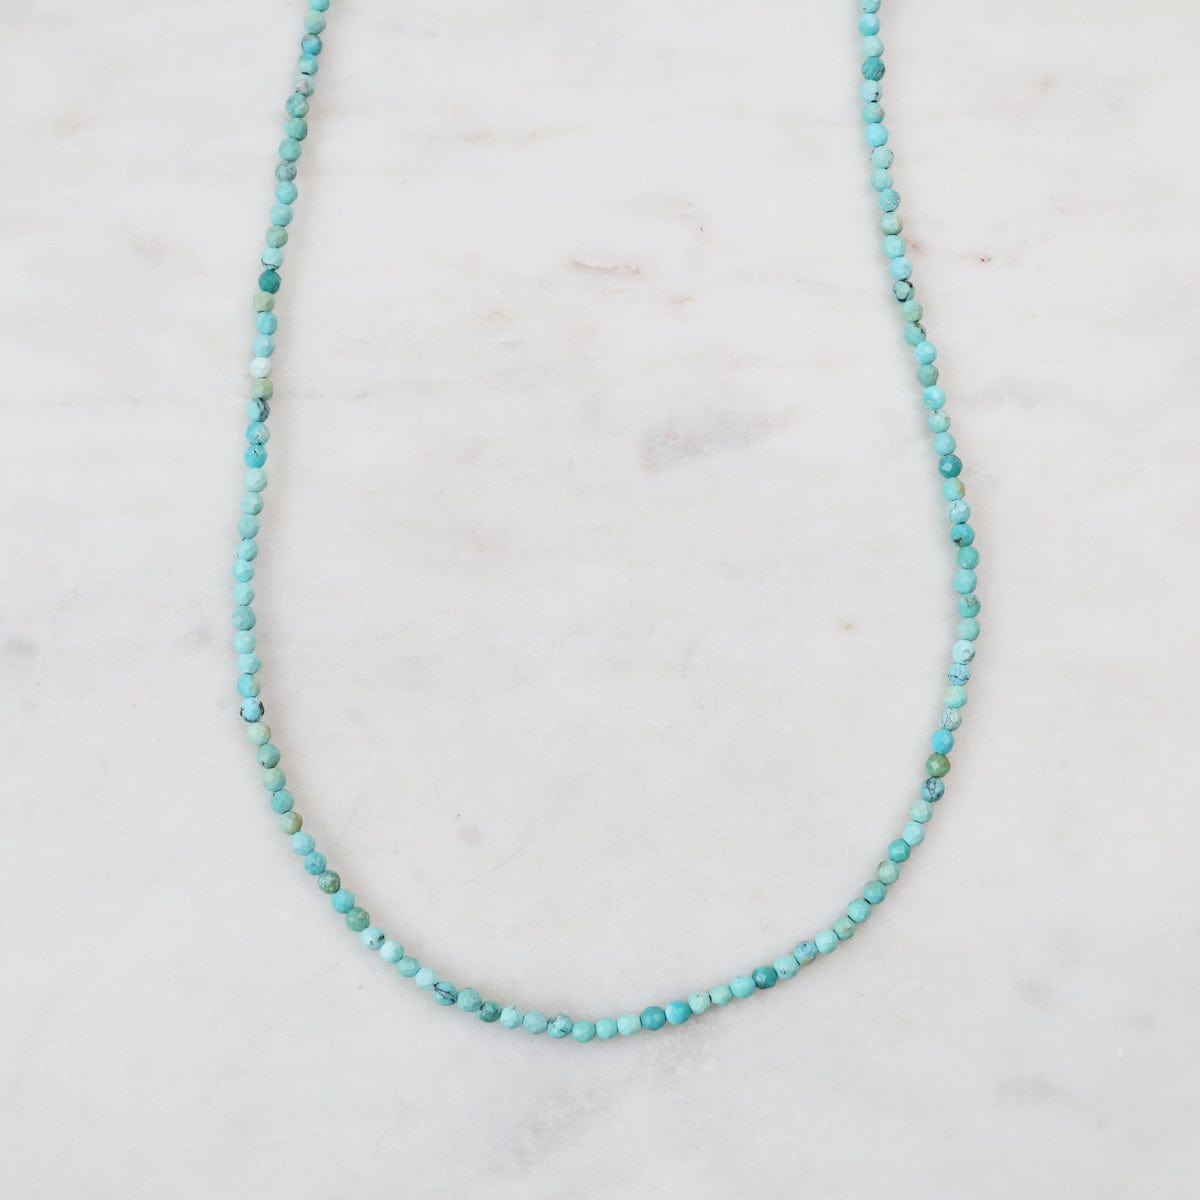 NKL-VRM Petite Turquoise Necklace